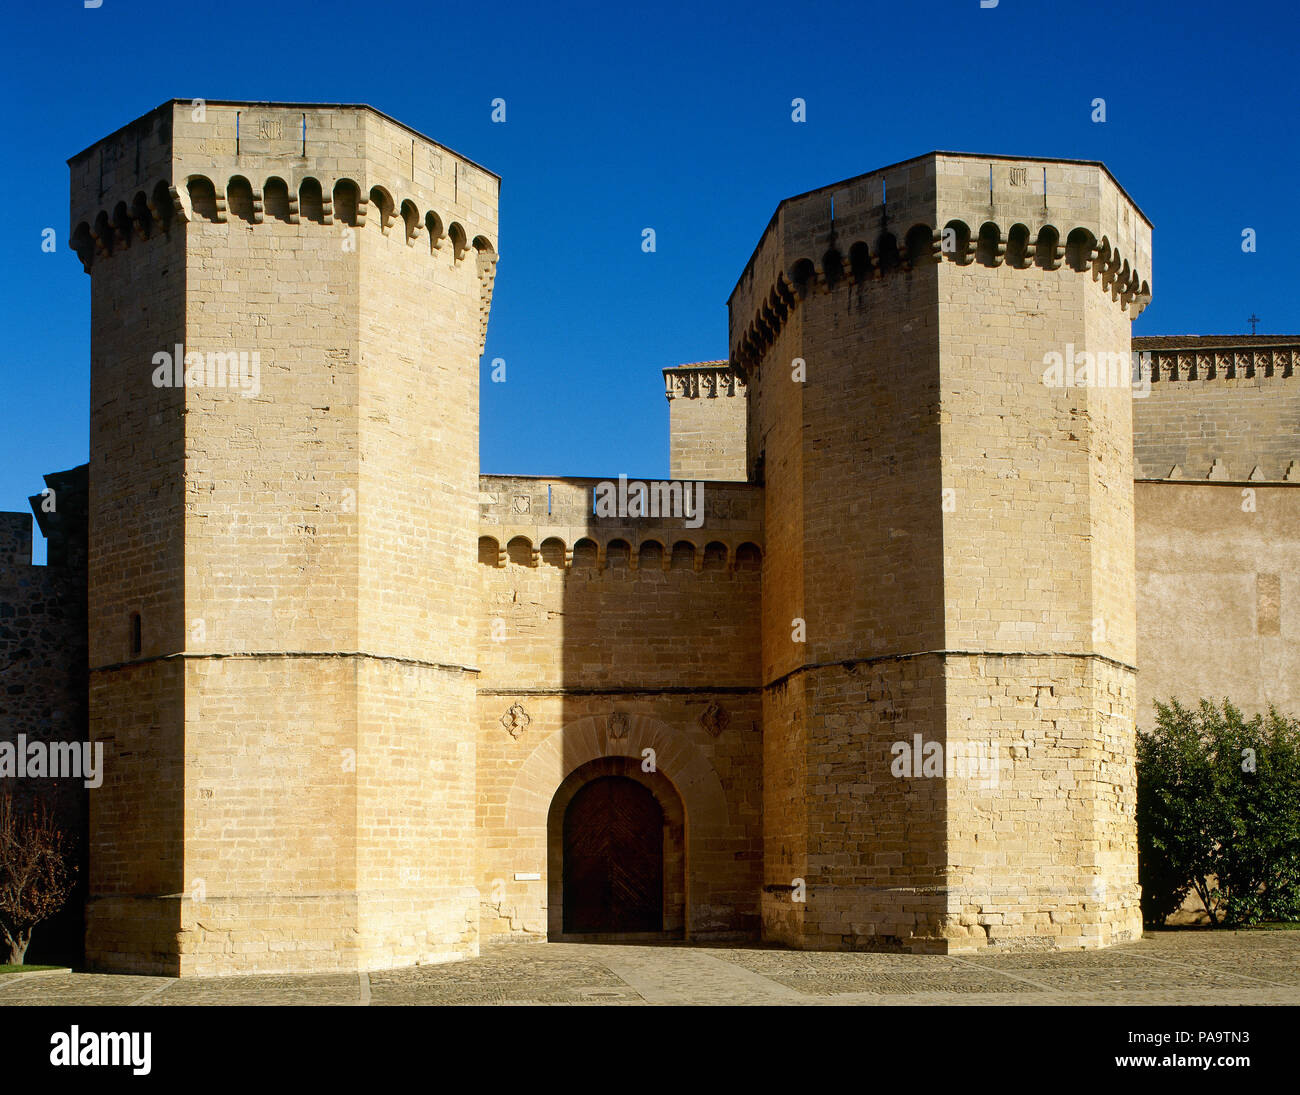 Spain, Catalonia, Tarragona province, Vimbodi. The Royal Abbey of Santa Maria de Poblet, a Cistercian monastery. Royal Gate, whose construction was ordered by Peter III el Ceremonios (Peter The Ceremonious, 1319-1387). Gothic style flanked by two octogonal towers. Stock Photo